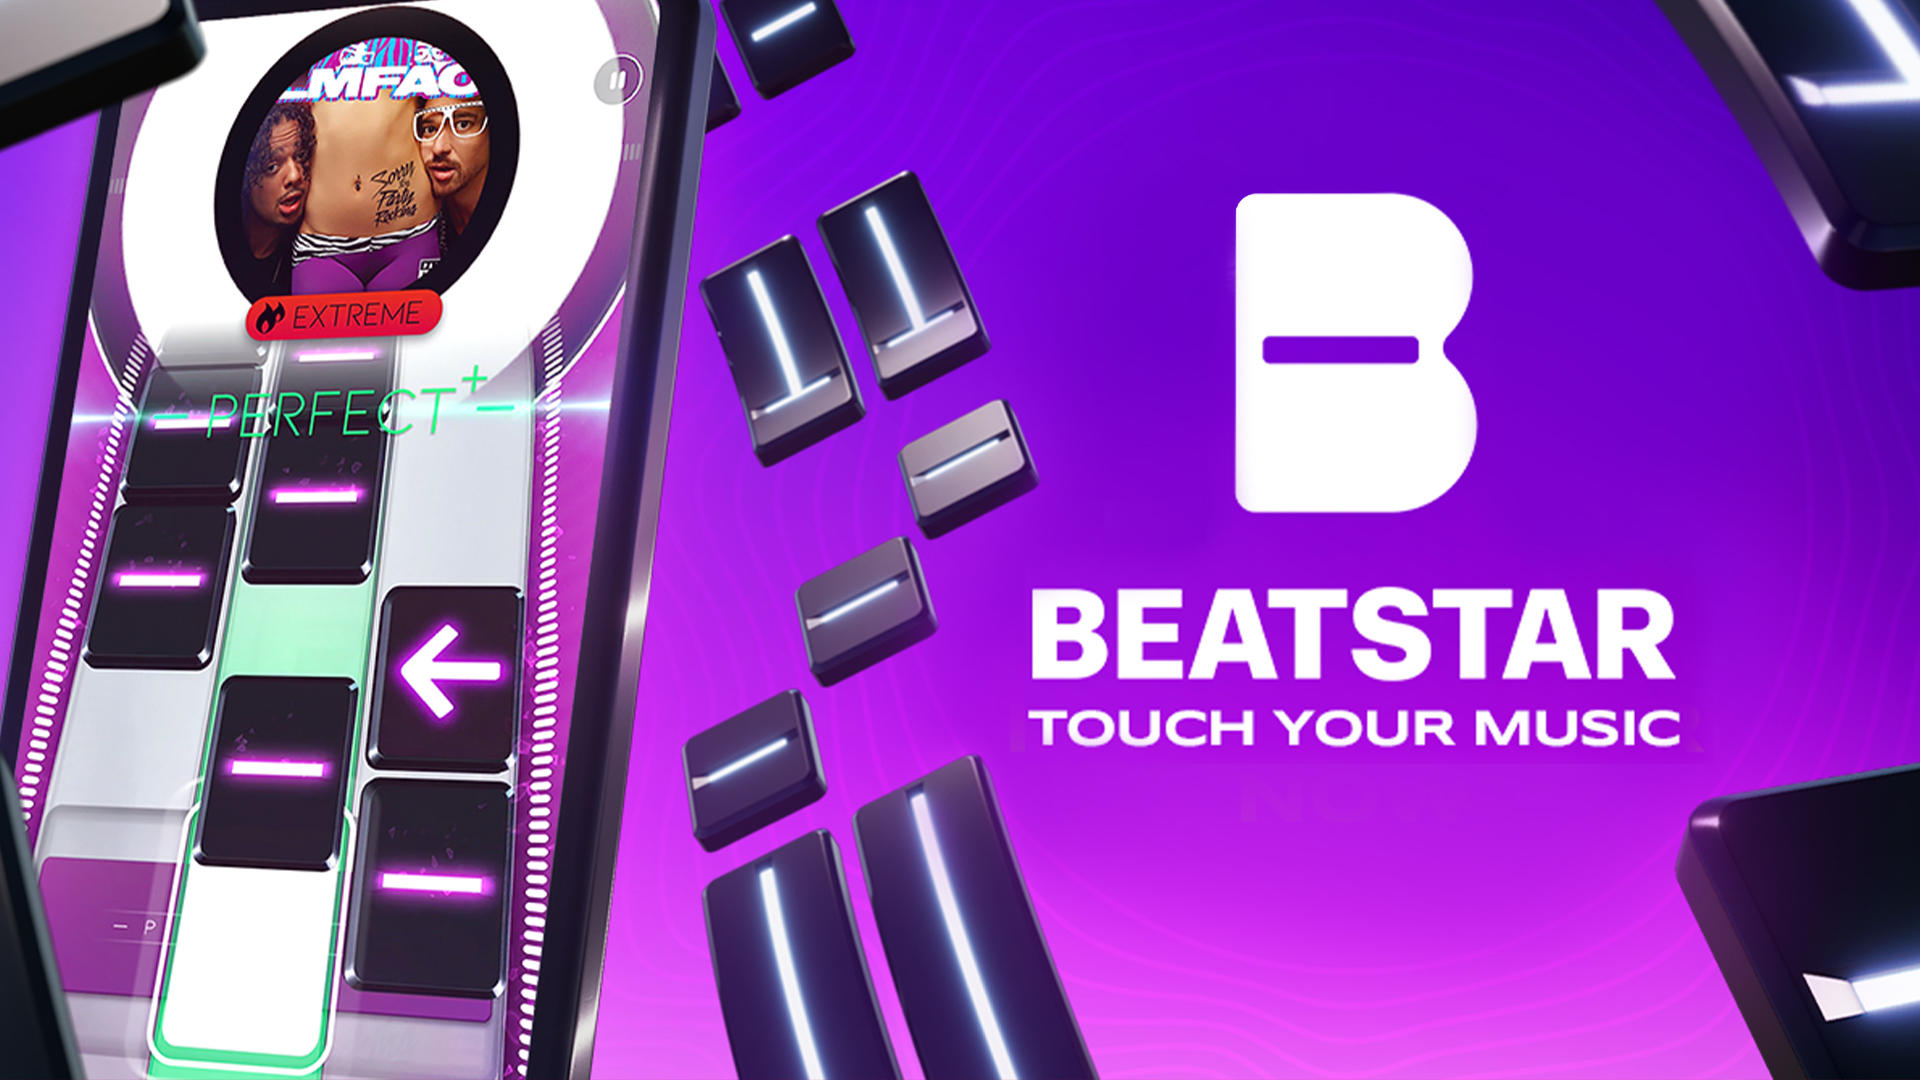 Beatstar Touch Your Music Mobile Android Ios Apk Download For Free-Taptap